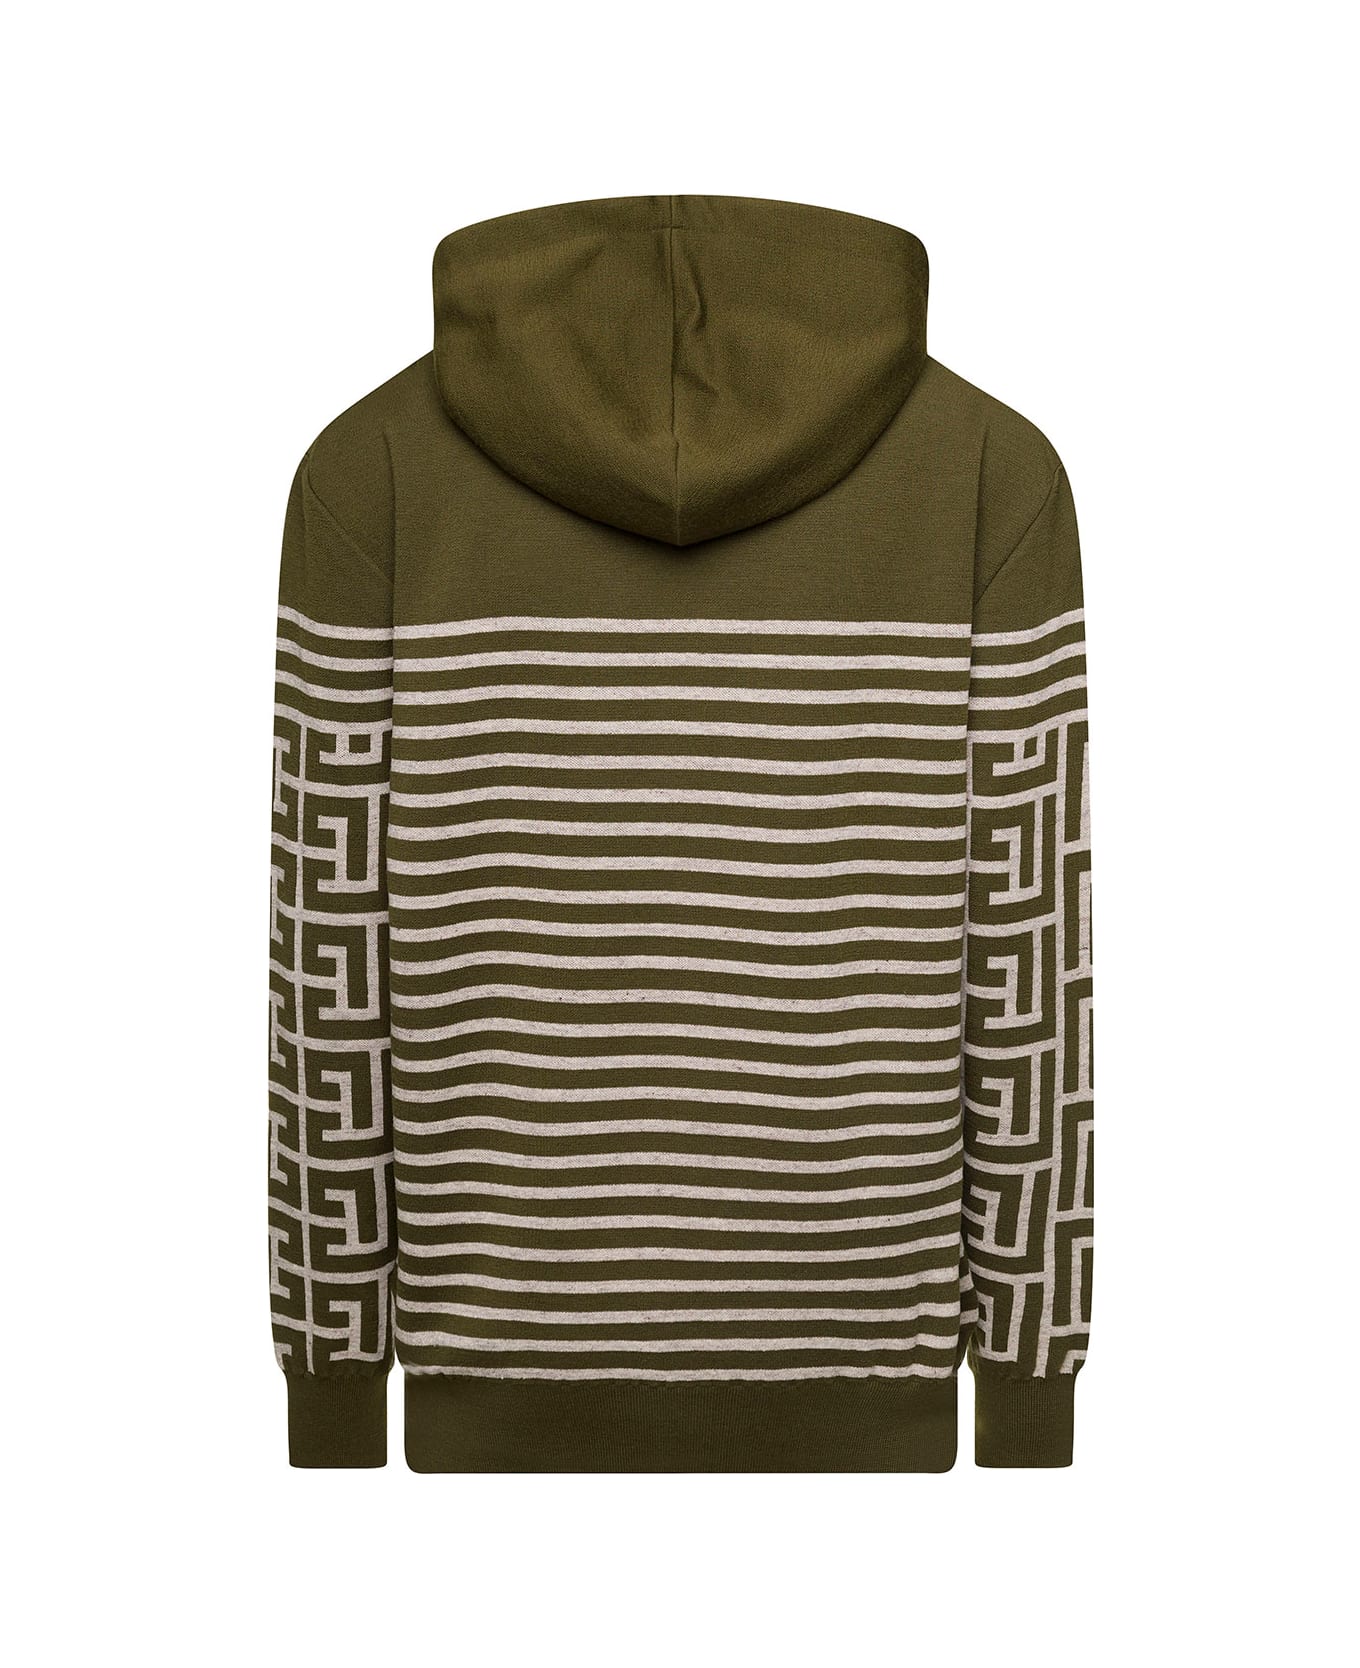 Balmain Military Green Hoodie With Monogram And Stripes In Wool And Linen Man - Green